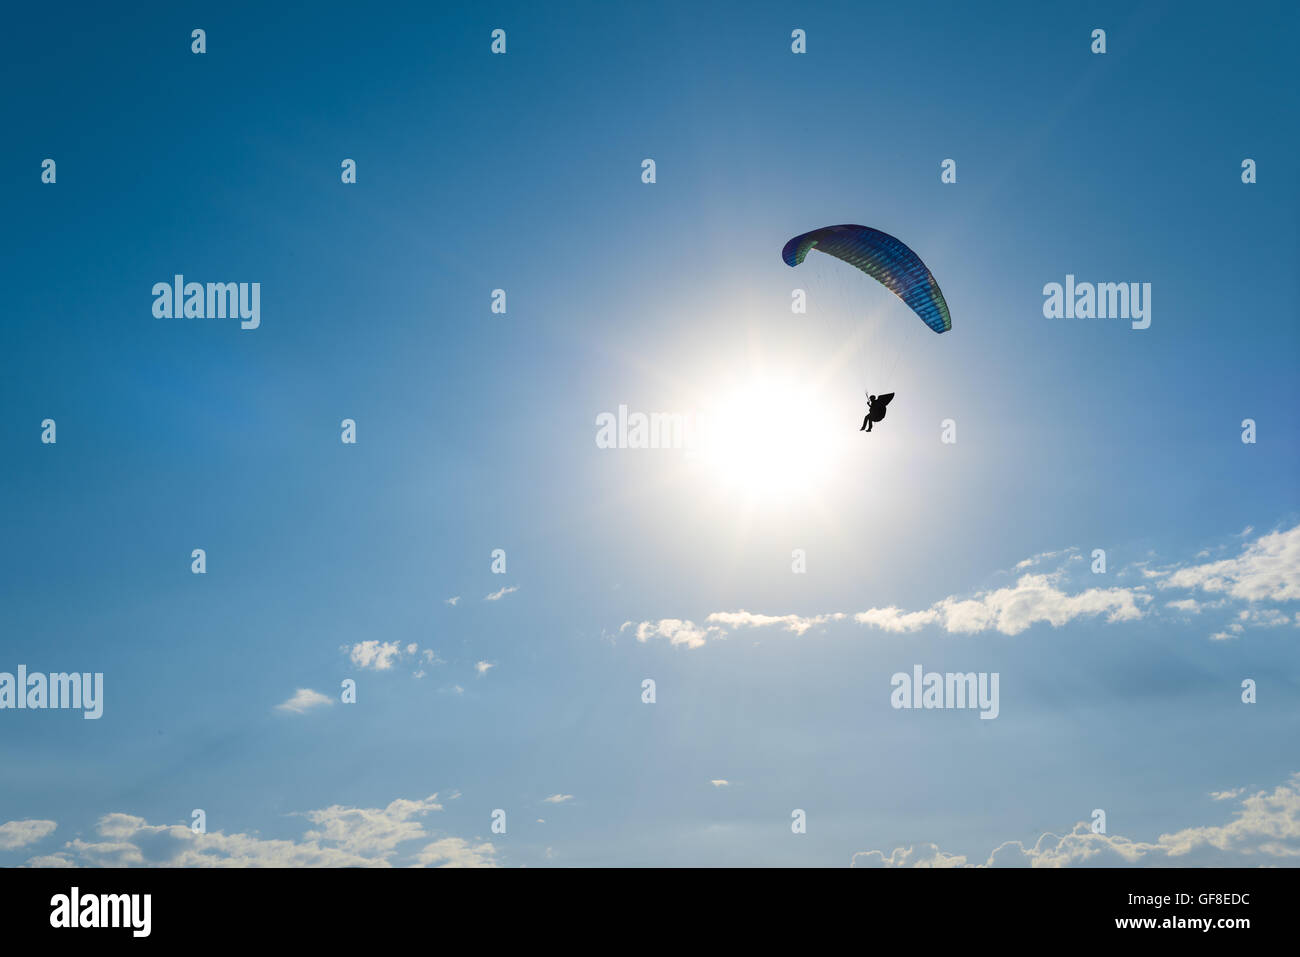 Paragliding in the sky Stock Photo